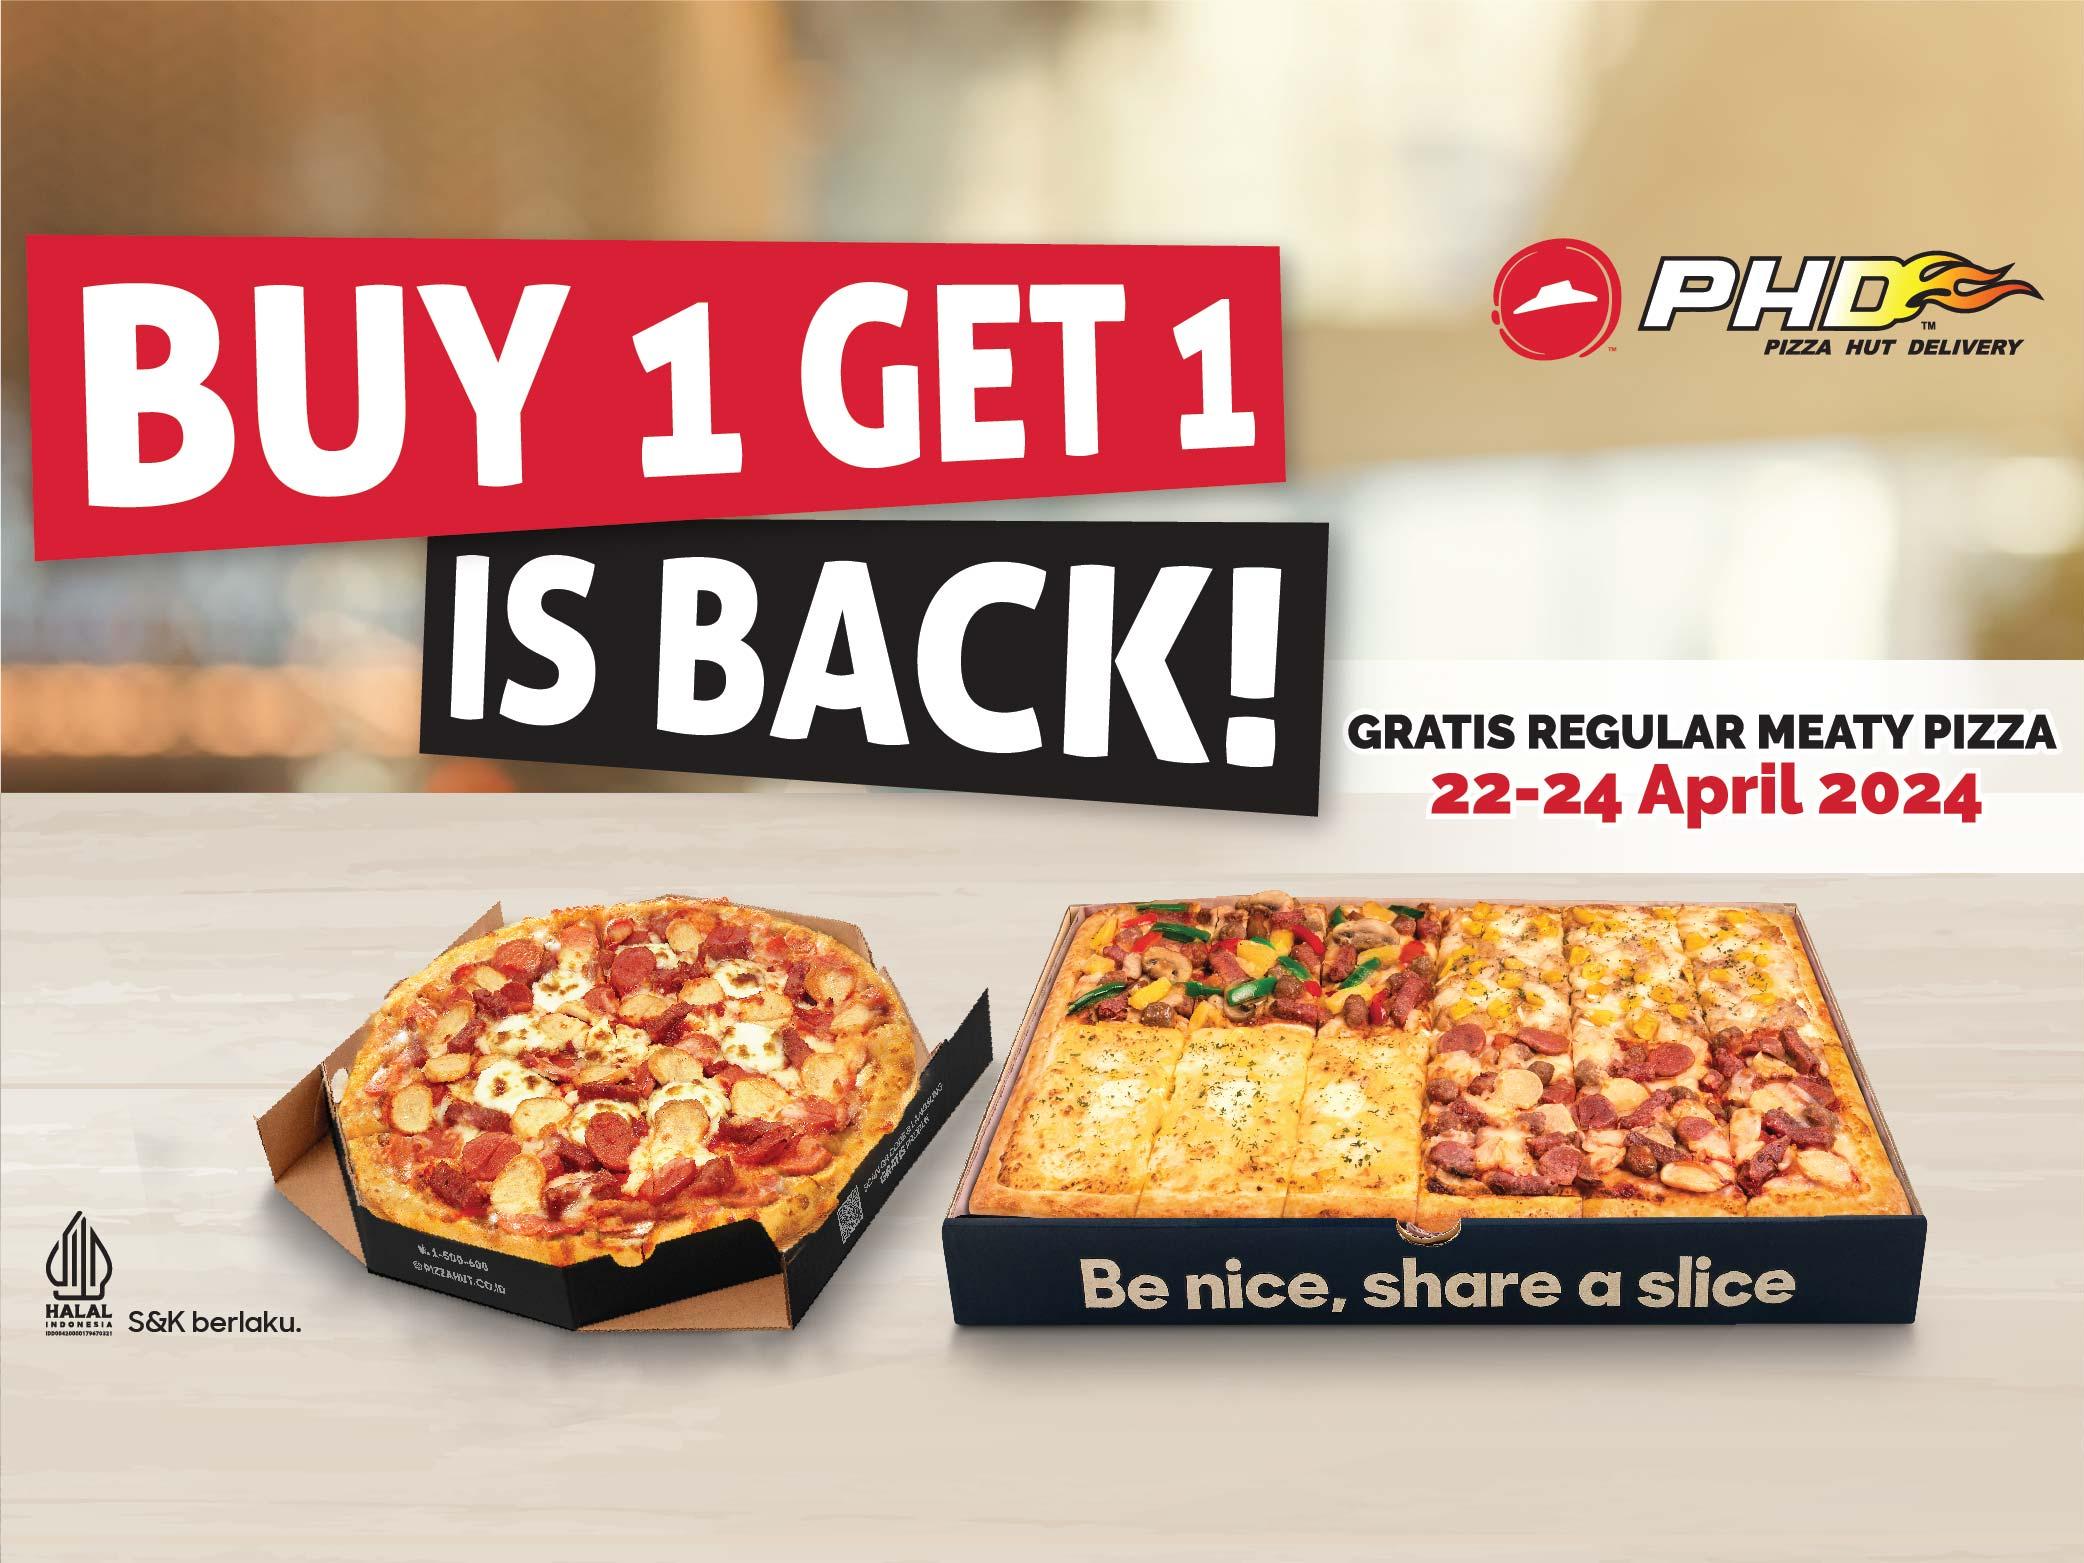 Pizza Hut Delivery - PHD, Thamrin Residence